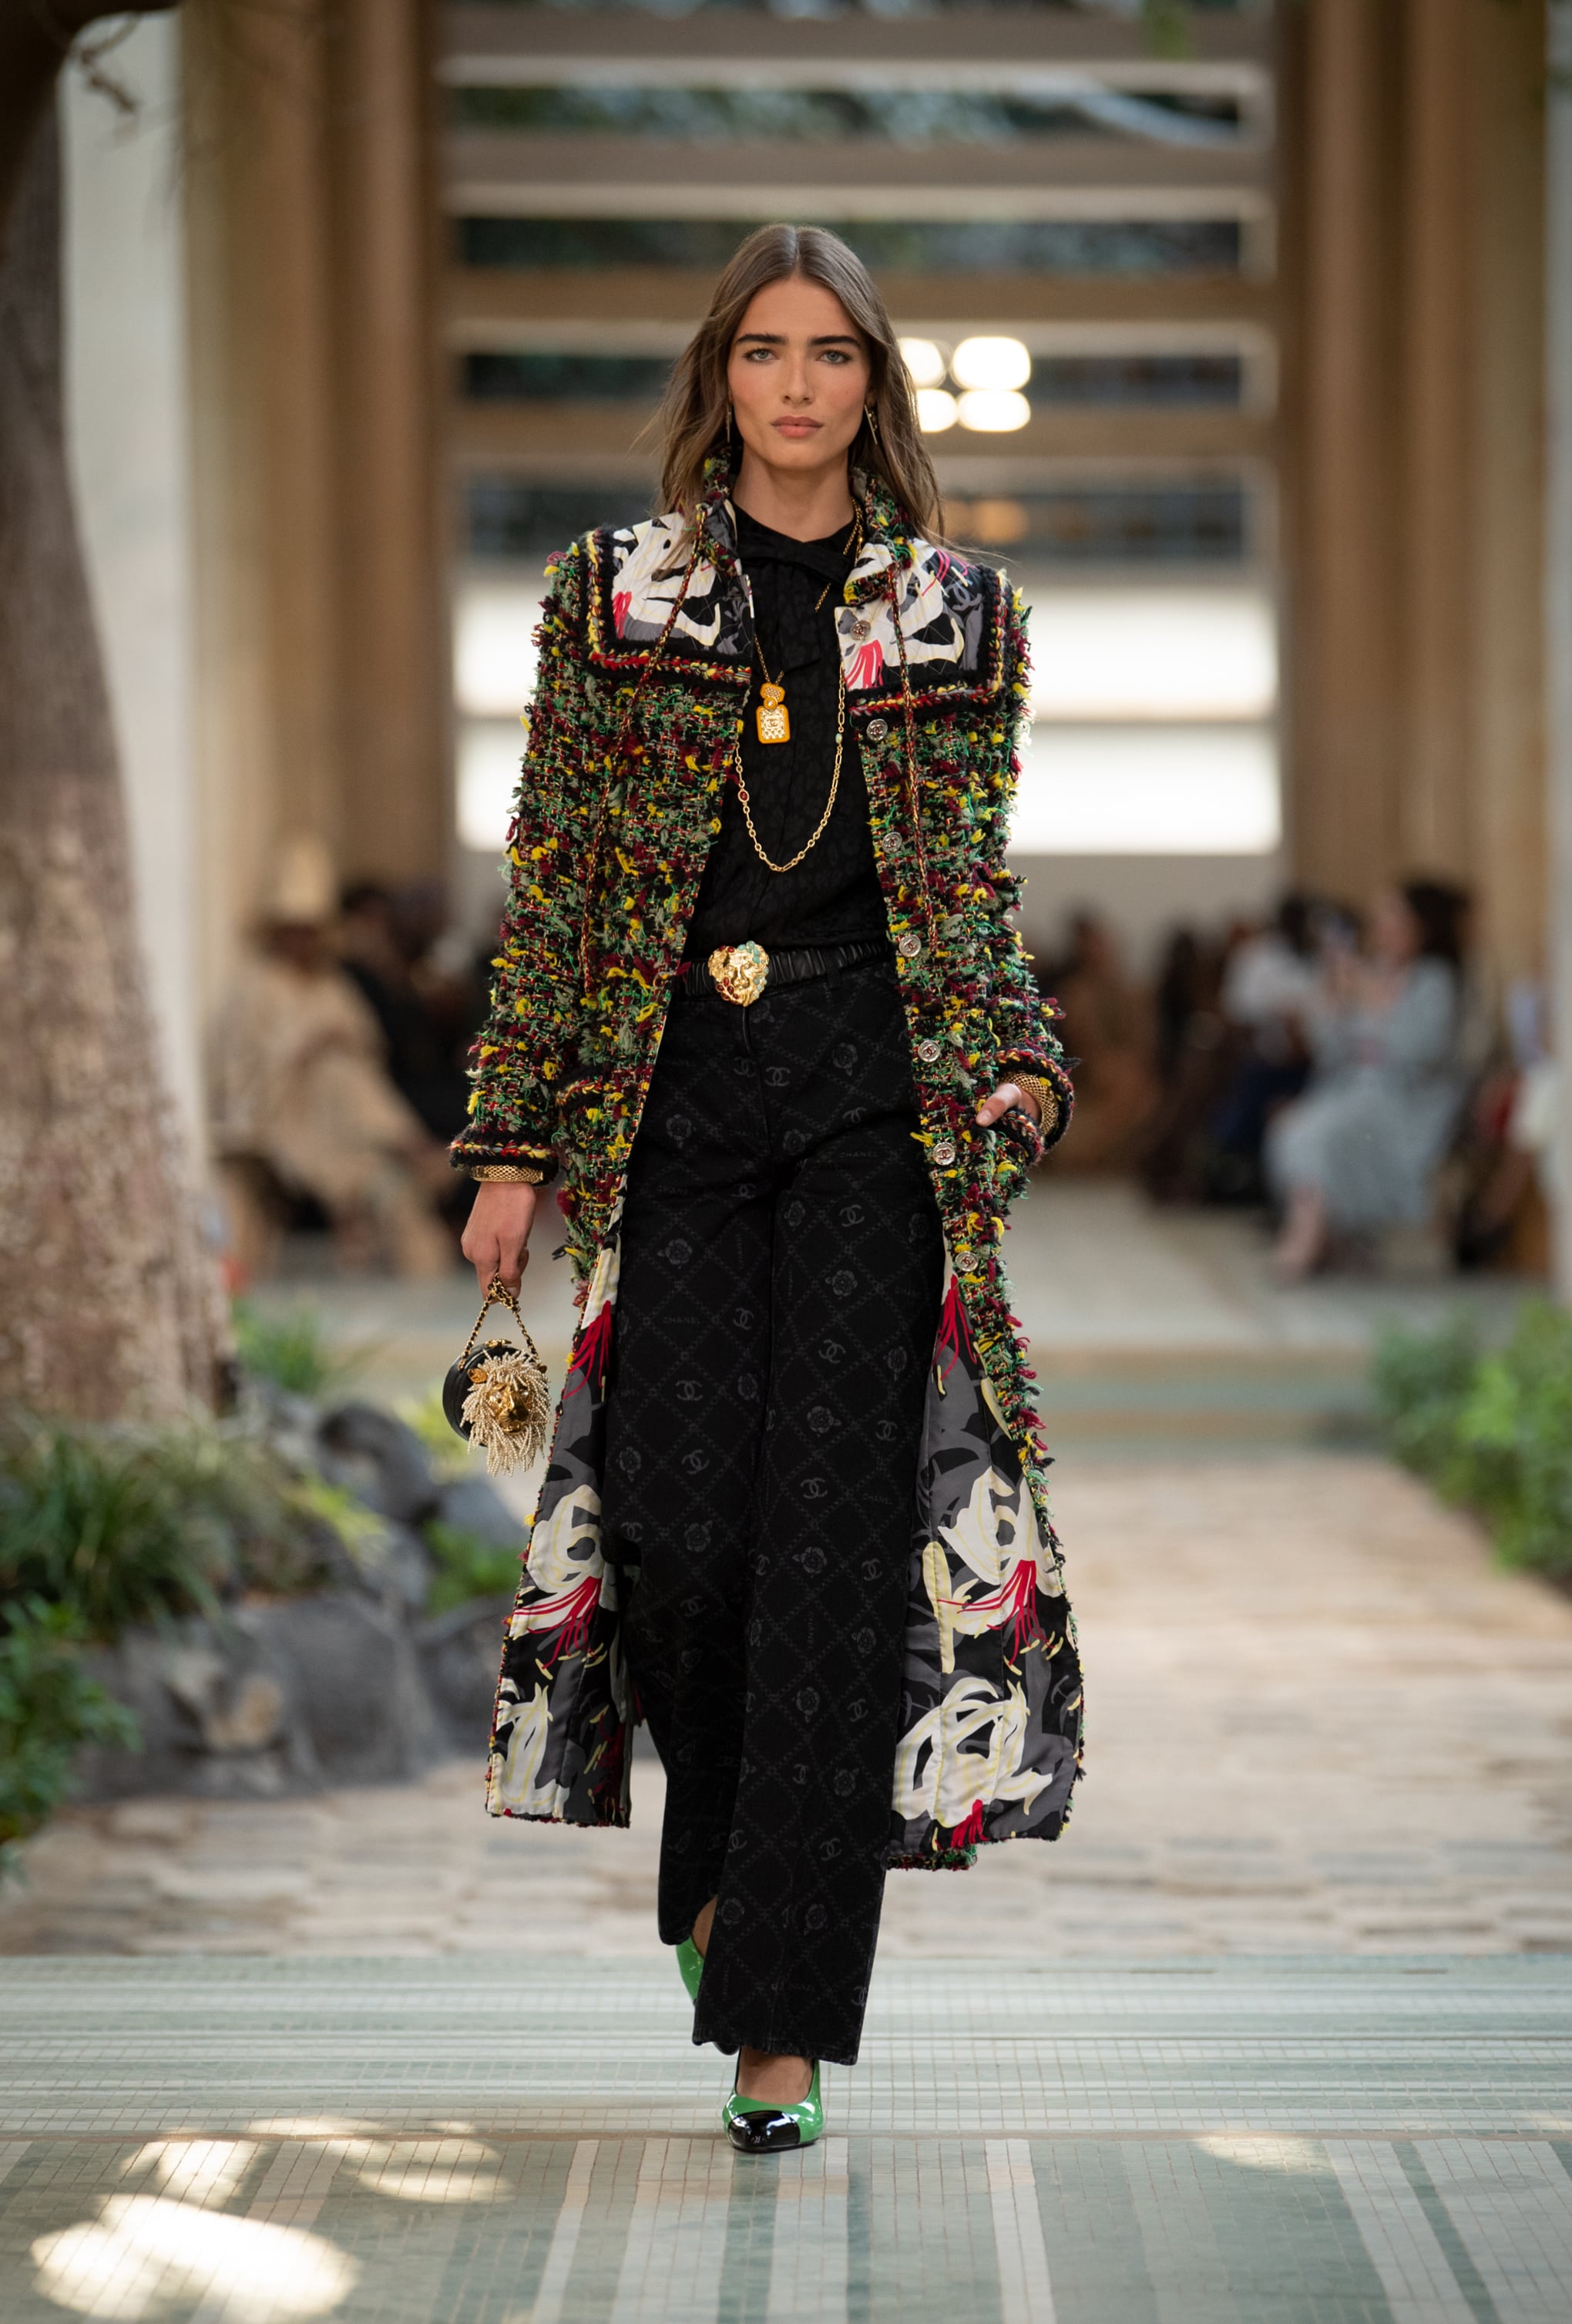 Celebs Chanel doubles down on tweeds for fall show